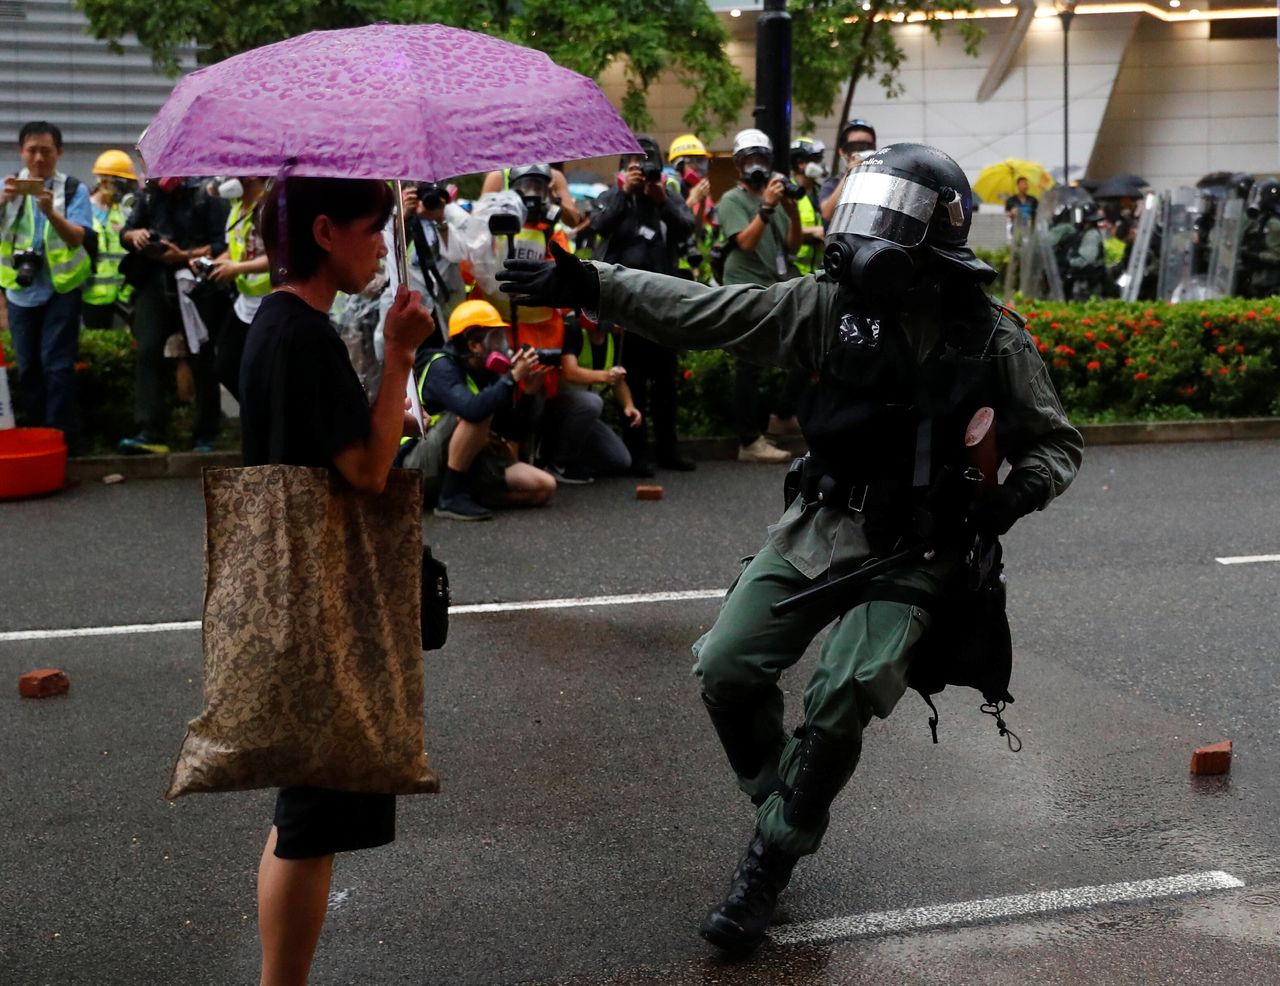 Riot police officer approaches a demonstrator during a protest in Tsuen Wan, in Hong Kong, August 25, 2019.